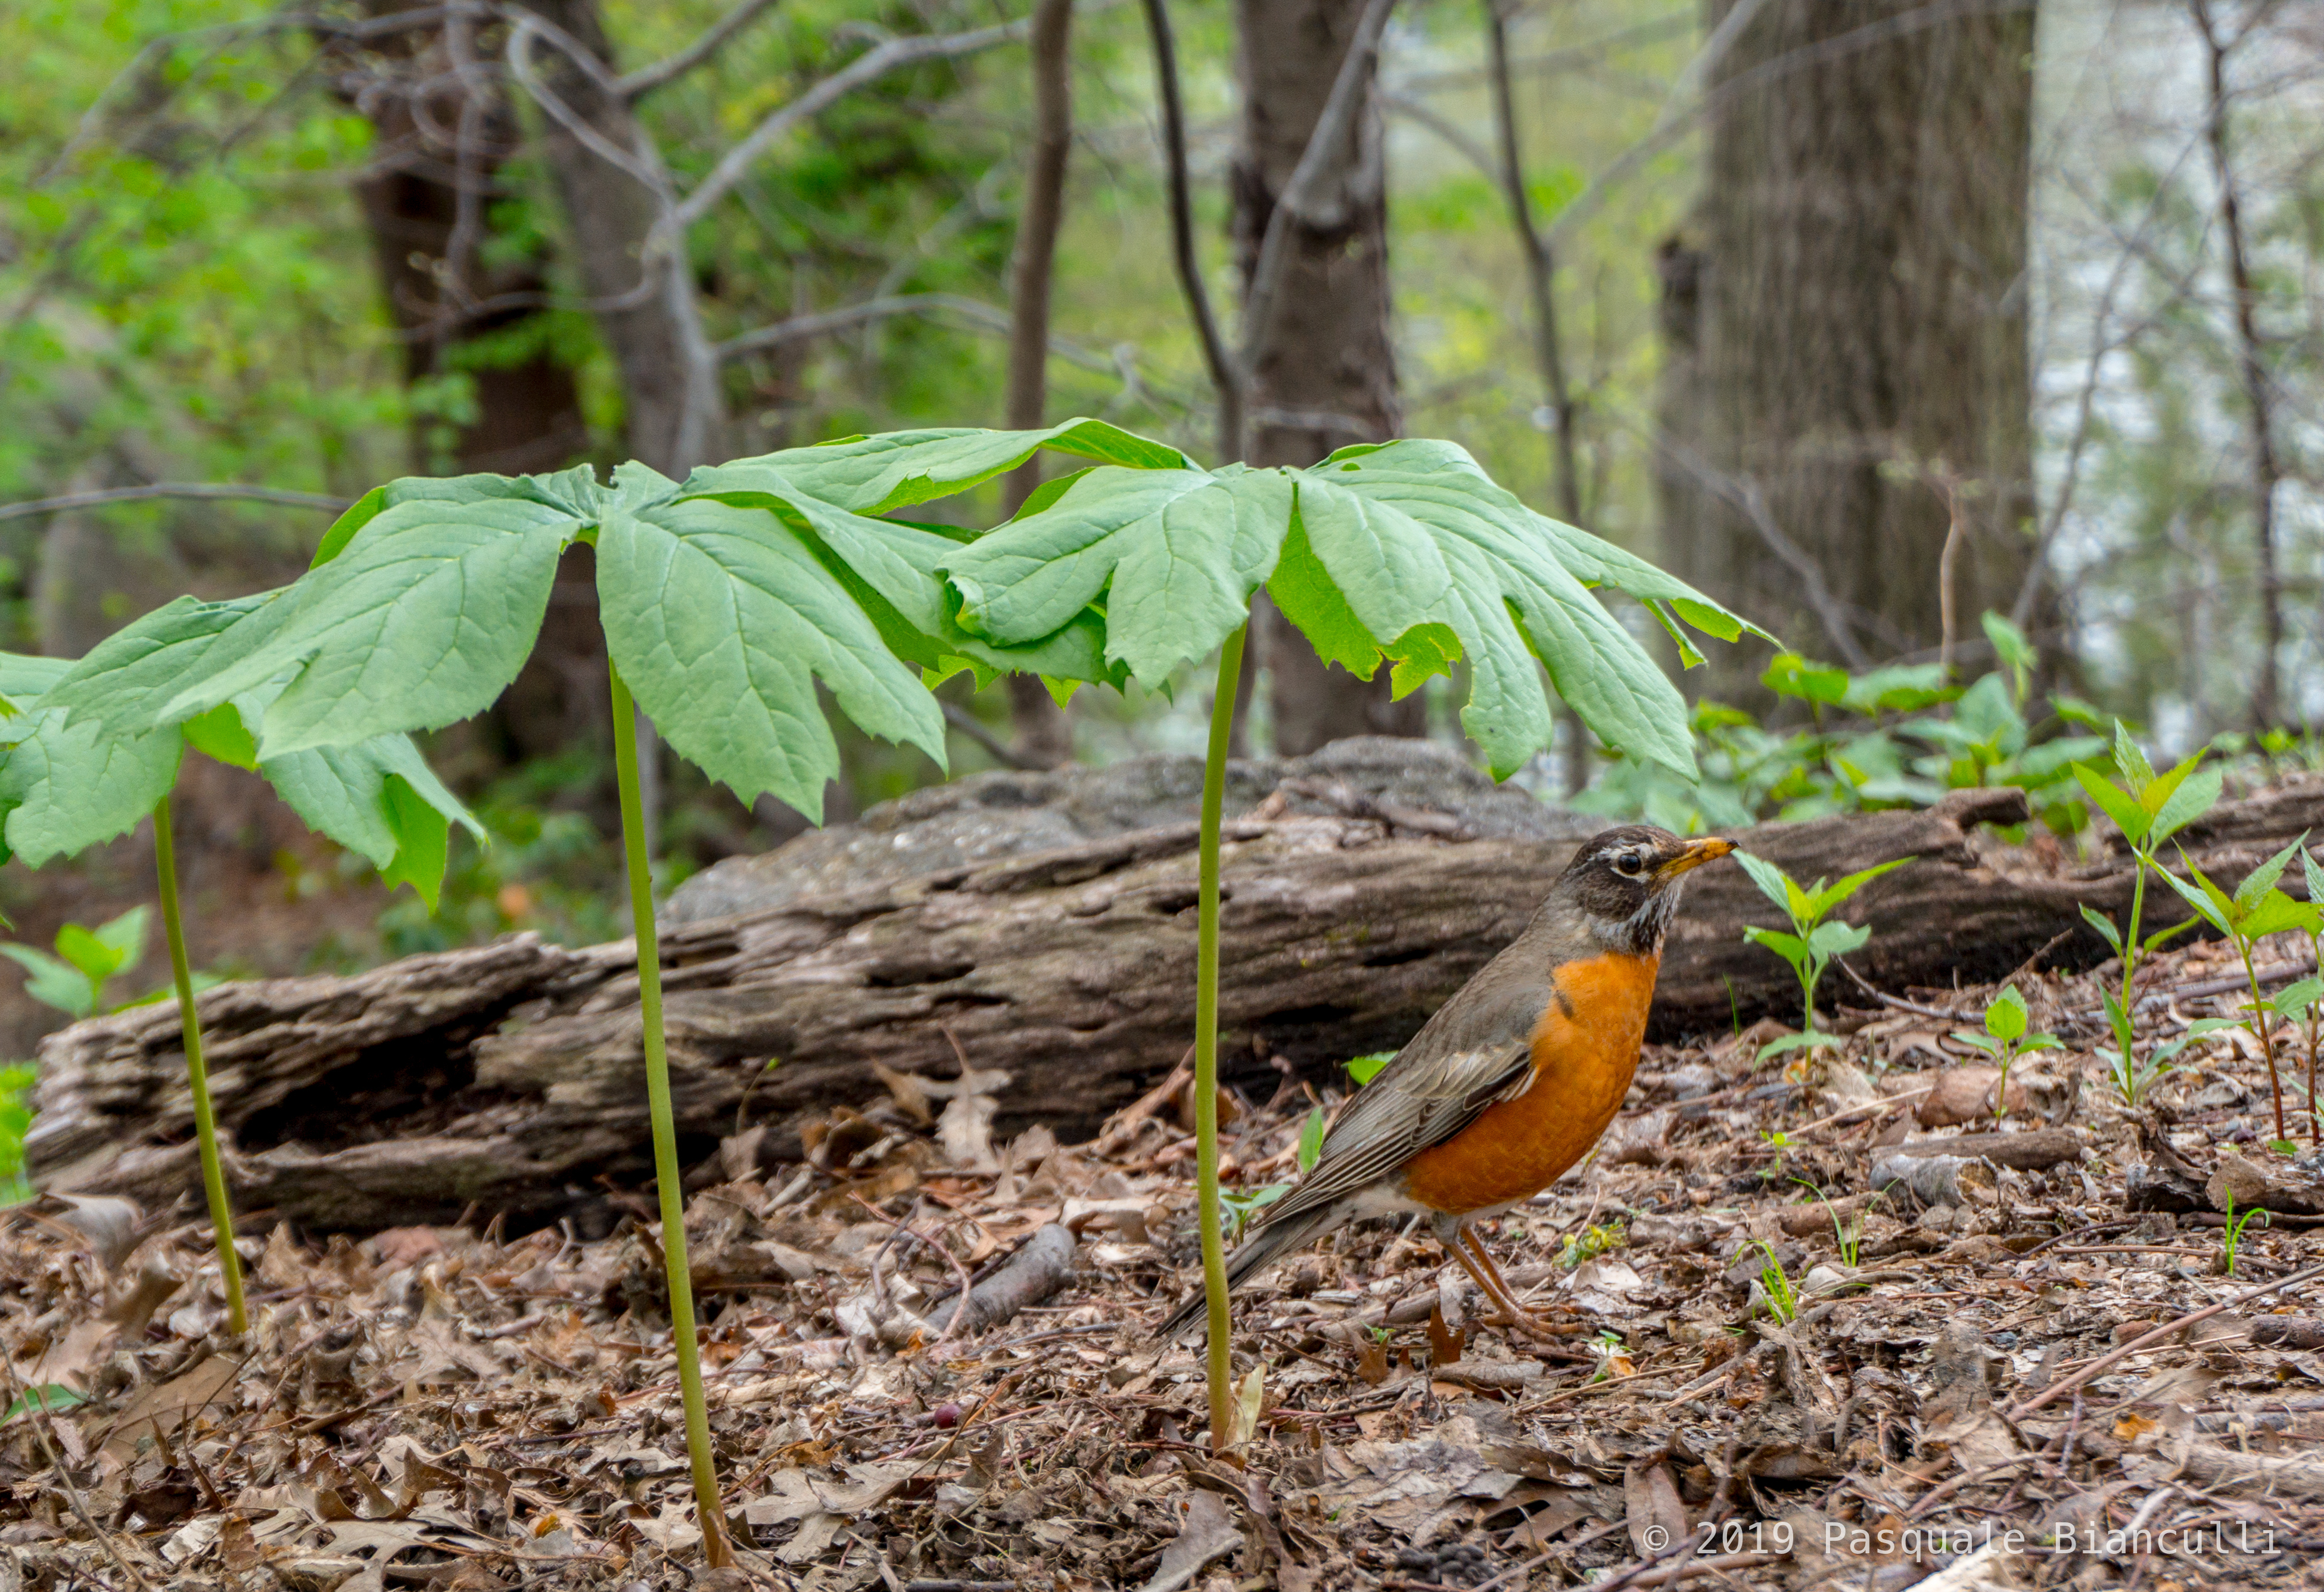 Thrushes like the American Robin (shown here under a native Mayapple) benefit from a natural ground layer rich with invertebrates. <a href="https://www.flickr.com/photos/pbin2351/40704211643" target="_blank" >Photo</a>: Pat Bianculli/<a href="https://creativecommons.org/licenses/by-nd/2.0/" target="_blank" >CC BY-ND 2.0</a>